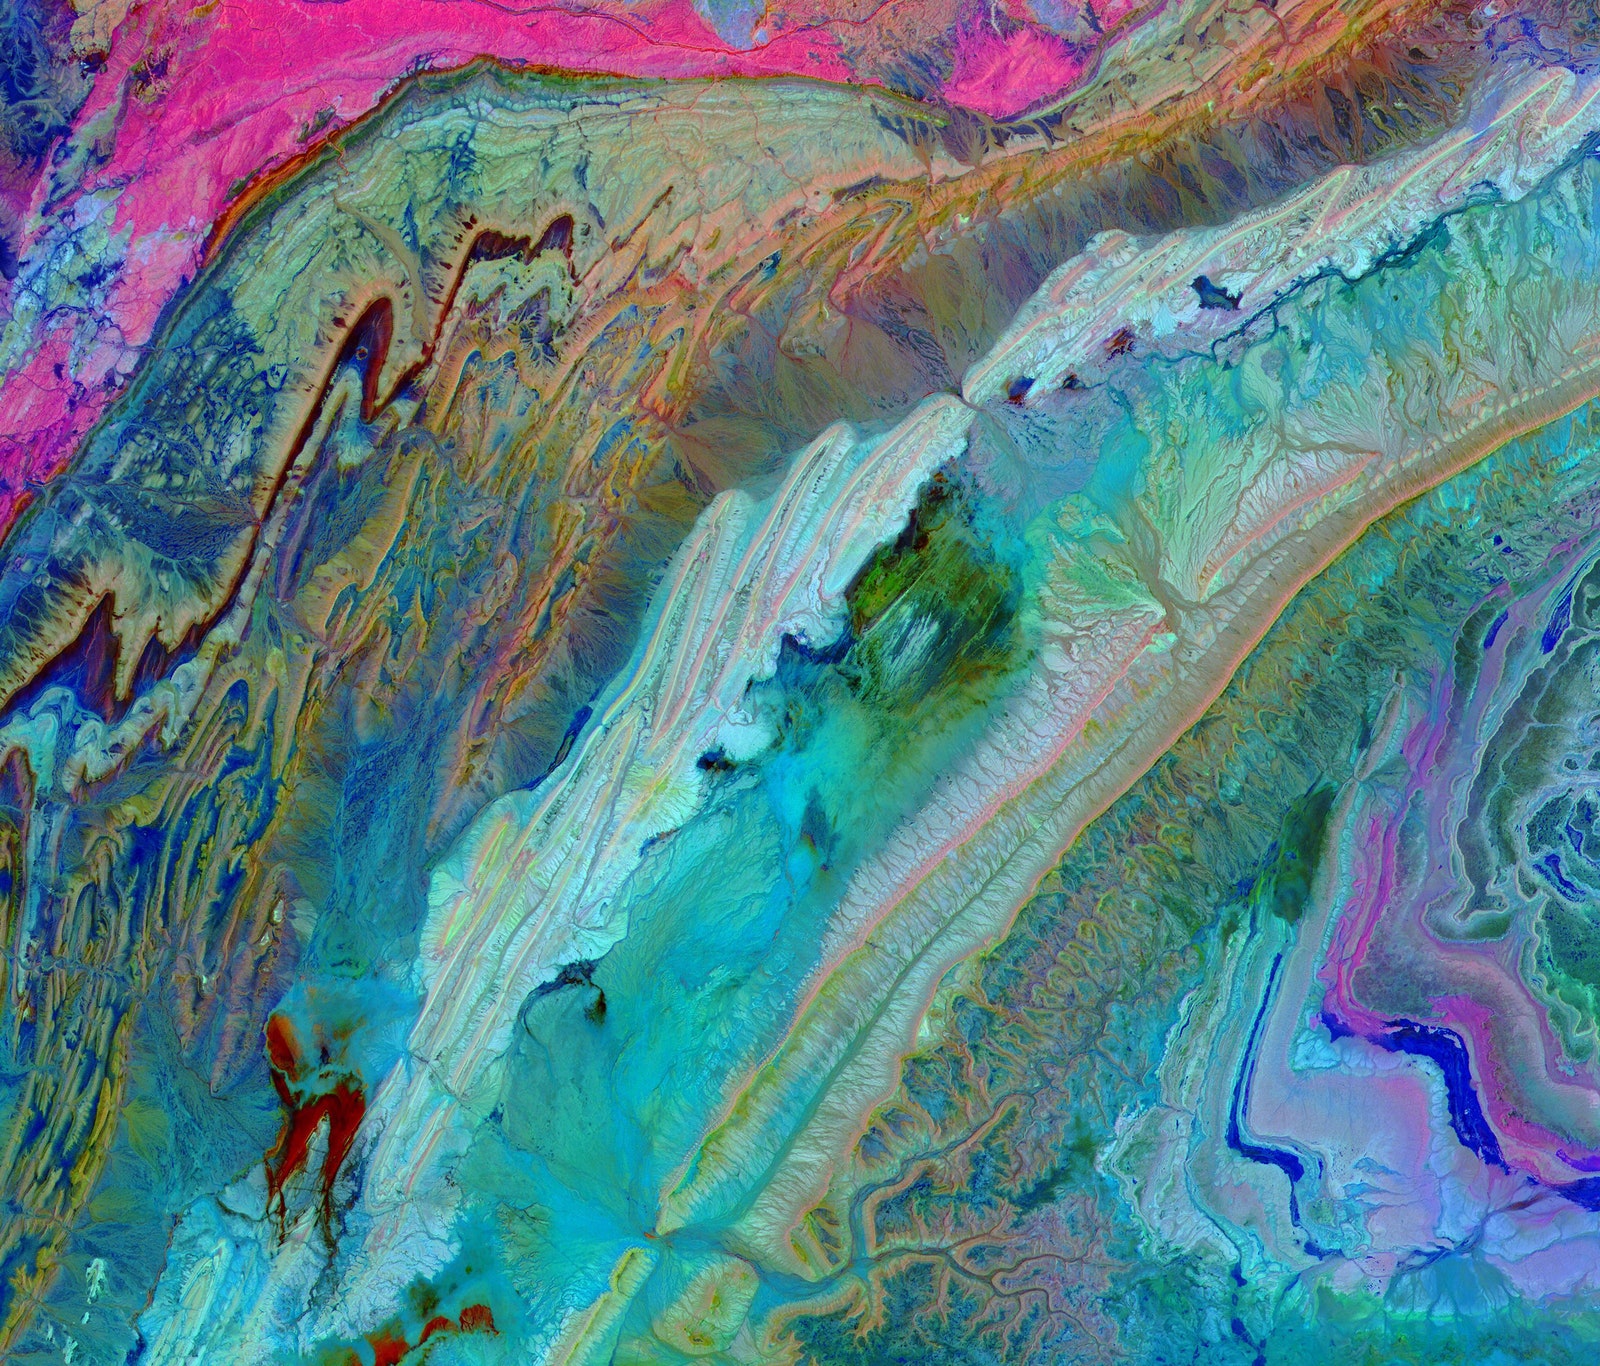 Space Photos of the Week: Polychromatic Views of the Earth Photography 